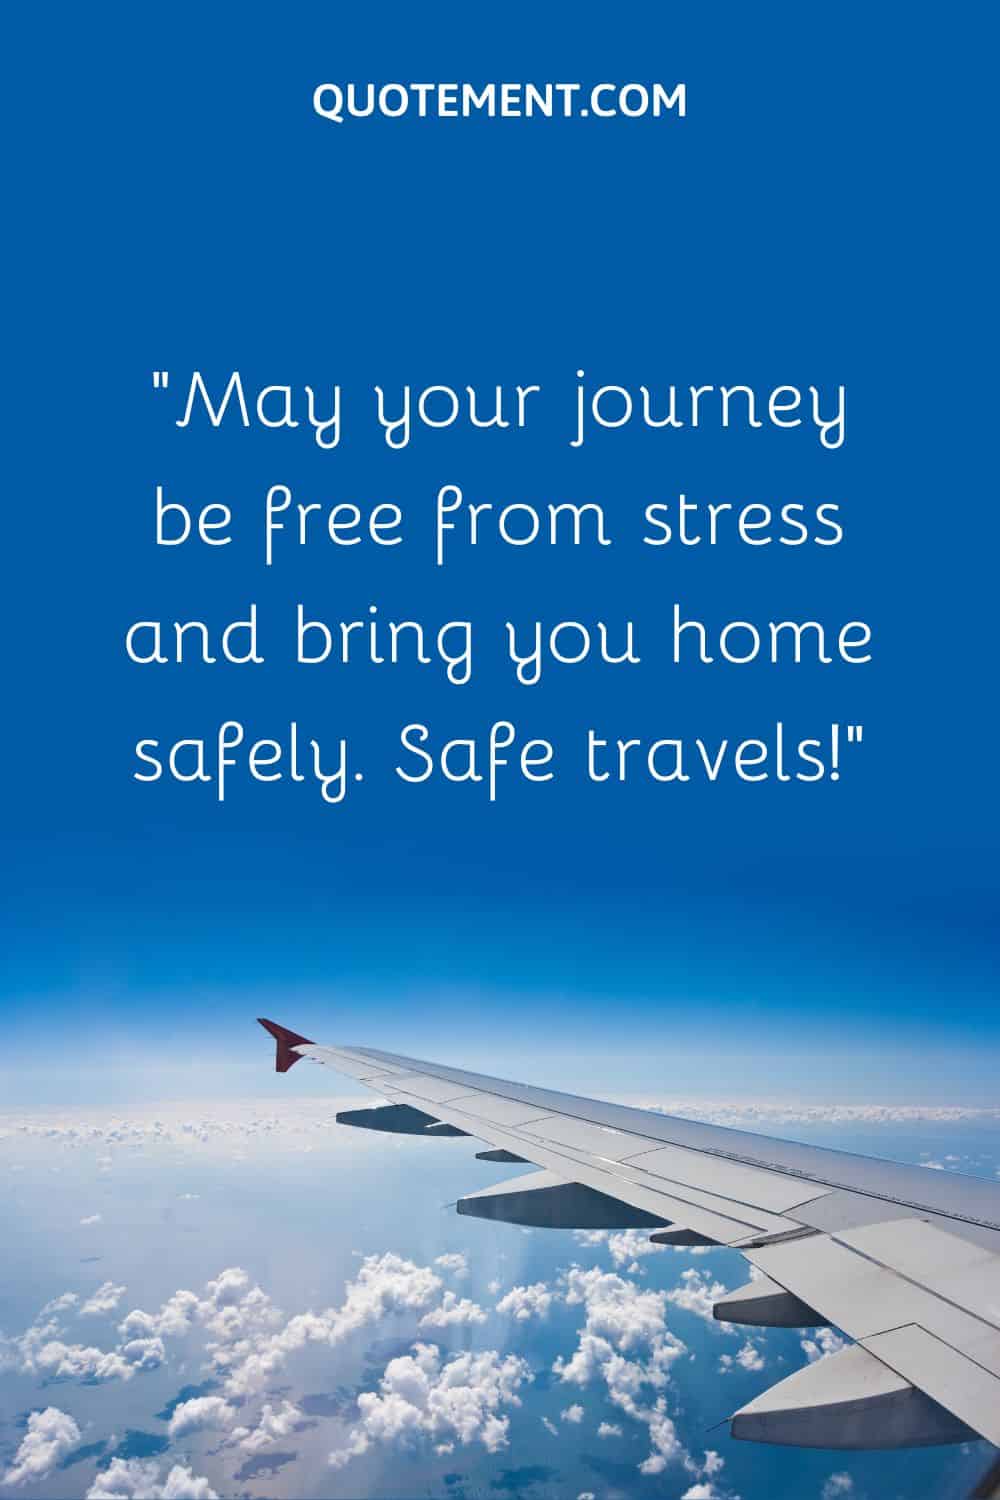 “May your journey be free from stress and bring you home safely